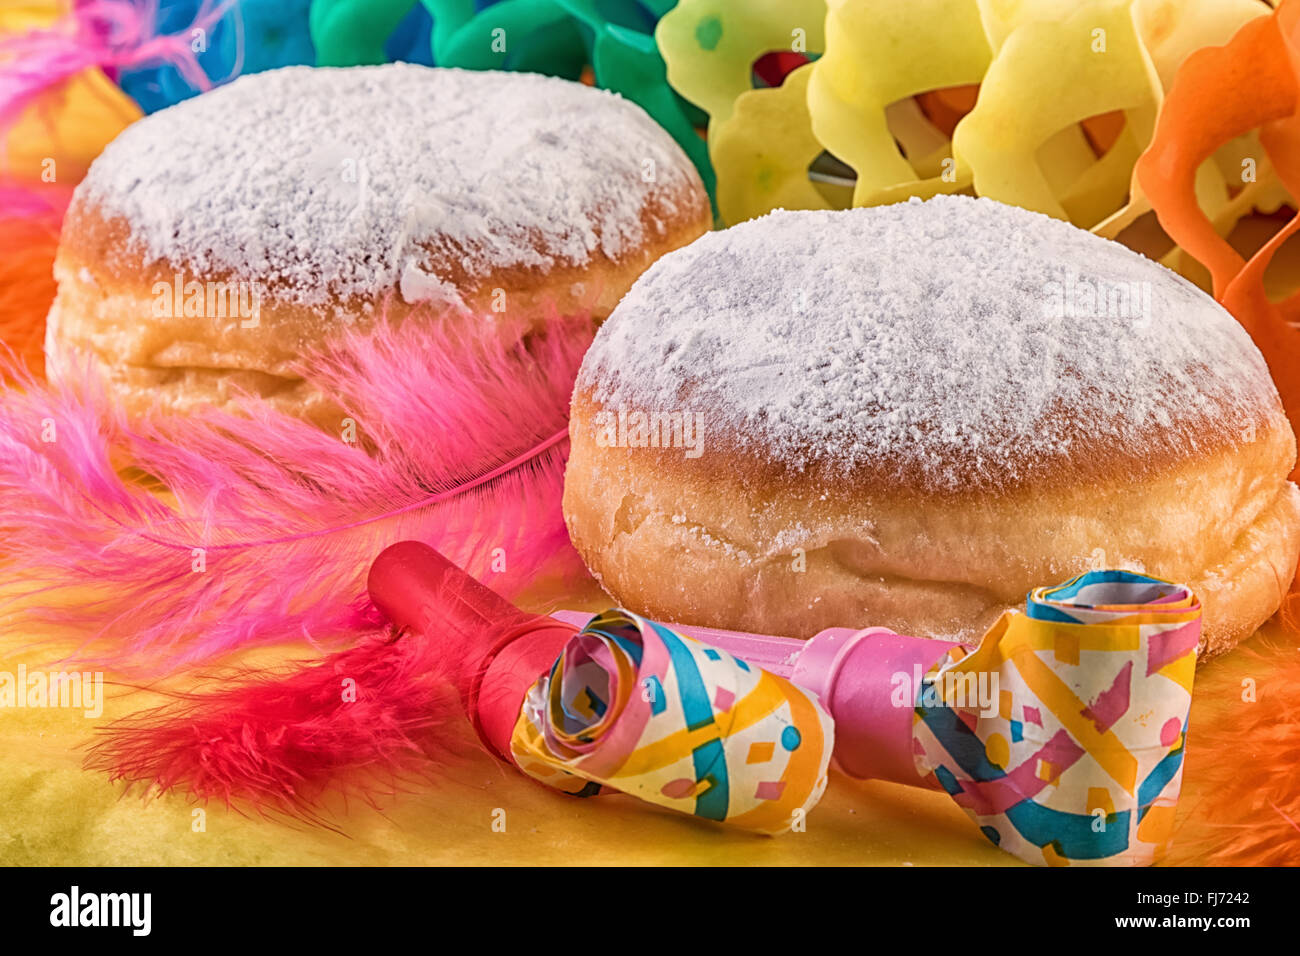 Donut Berliner Doughnut or Krapfen with Carnival Decoration Stock Photo